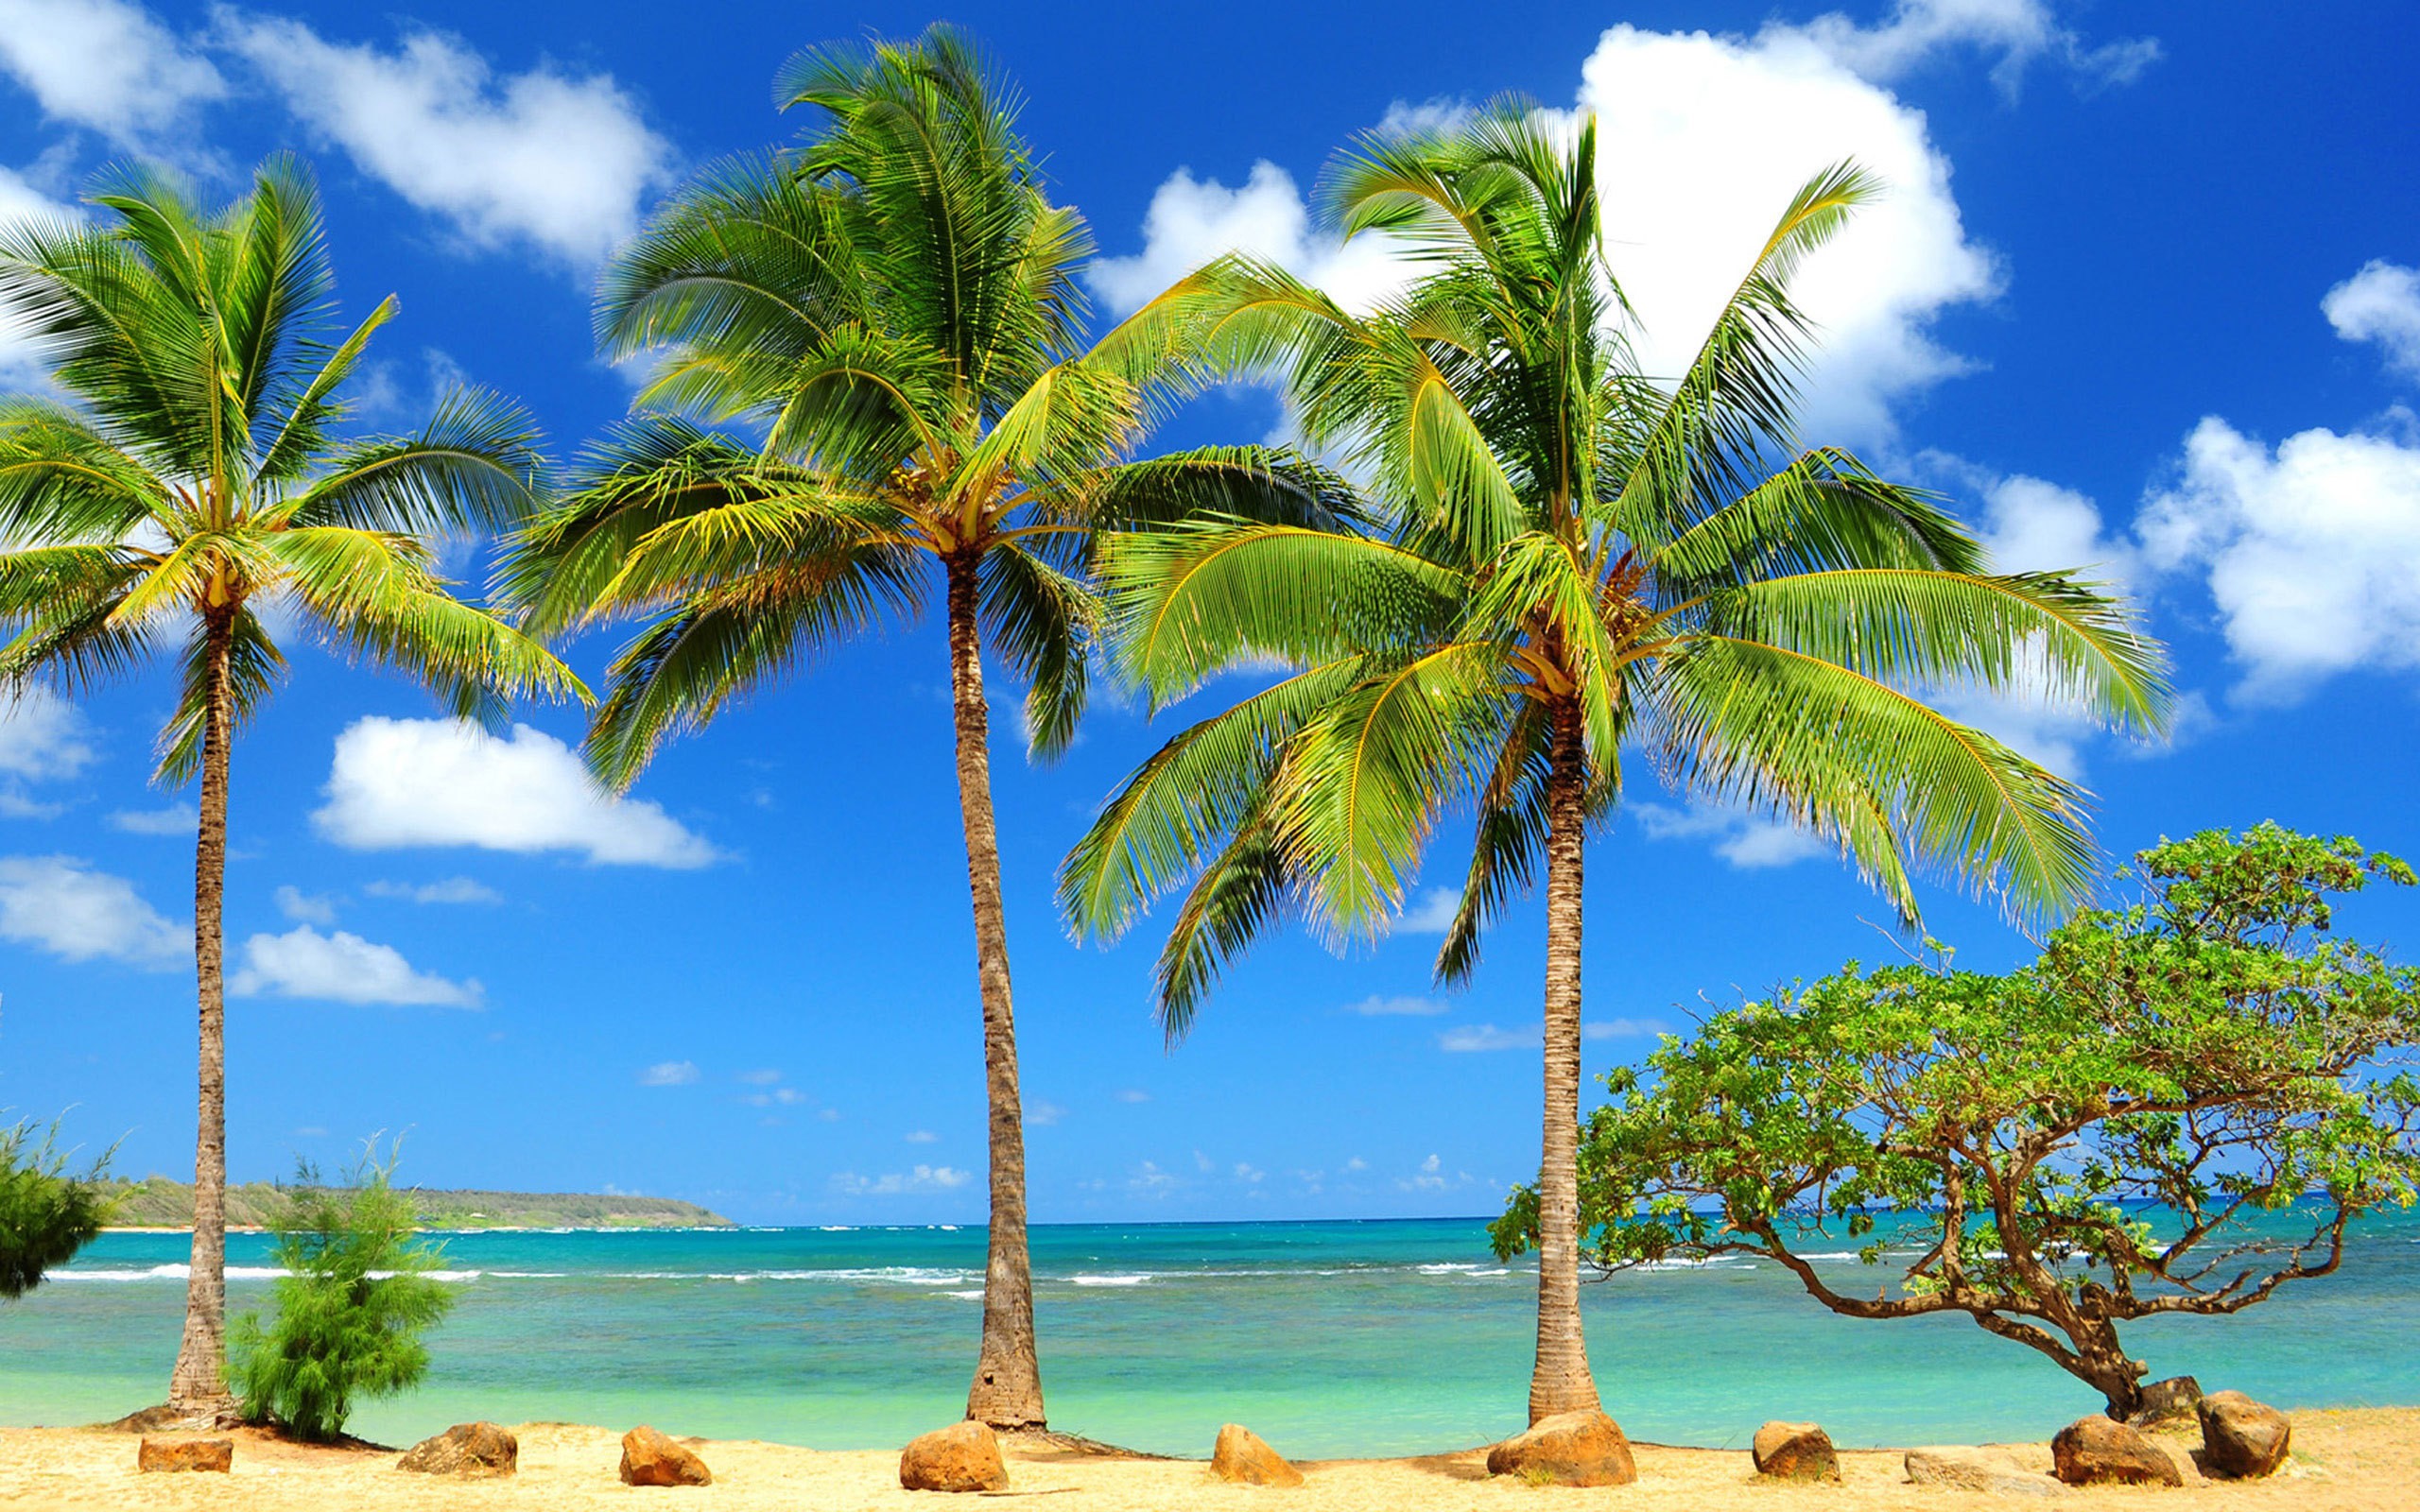 HD Pictures Of Palm Trees Wallpapers and Photos | HD Beach Wallpapers